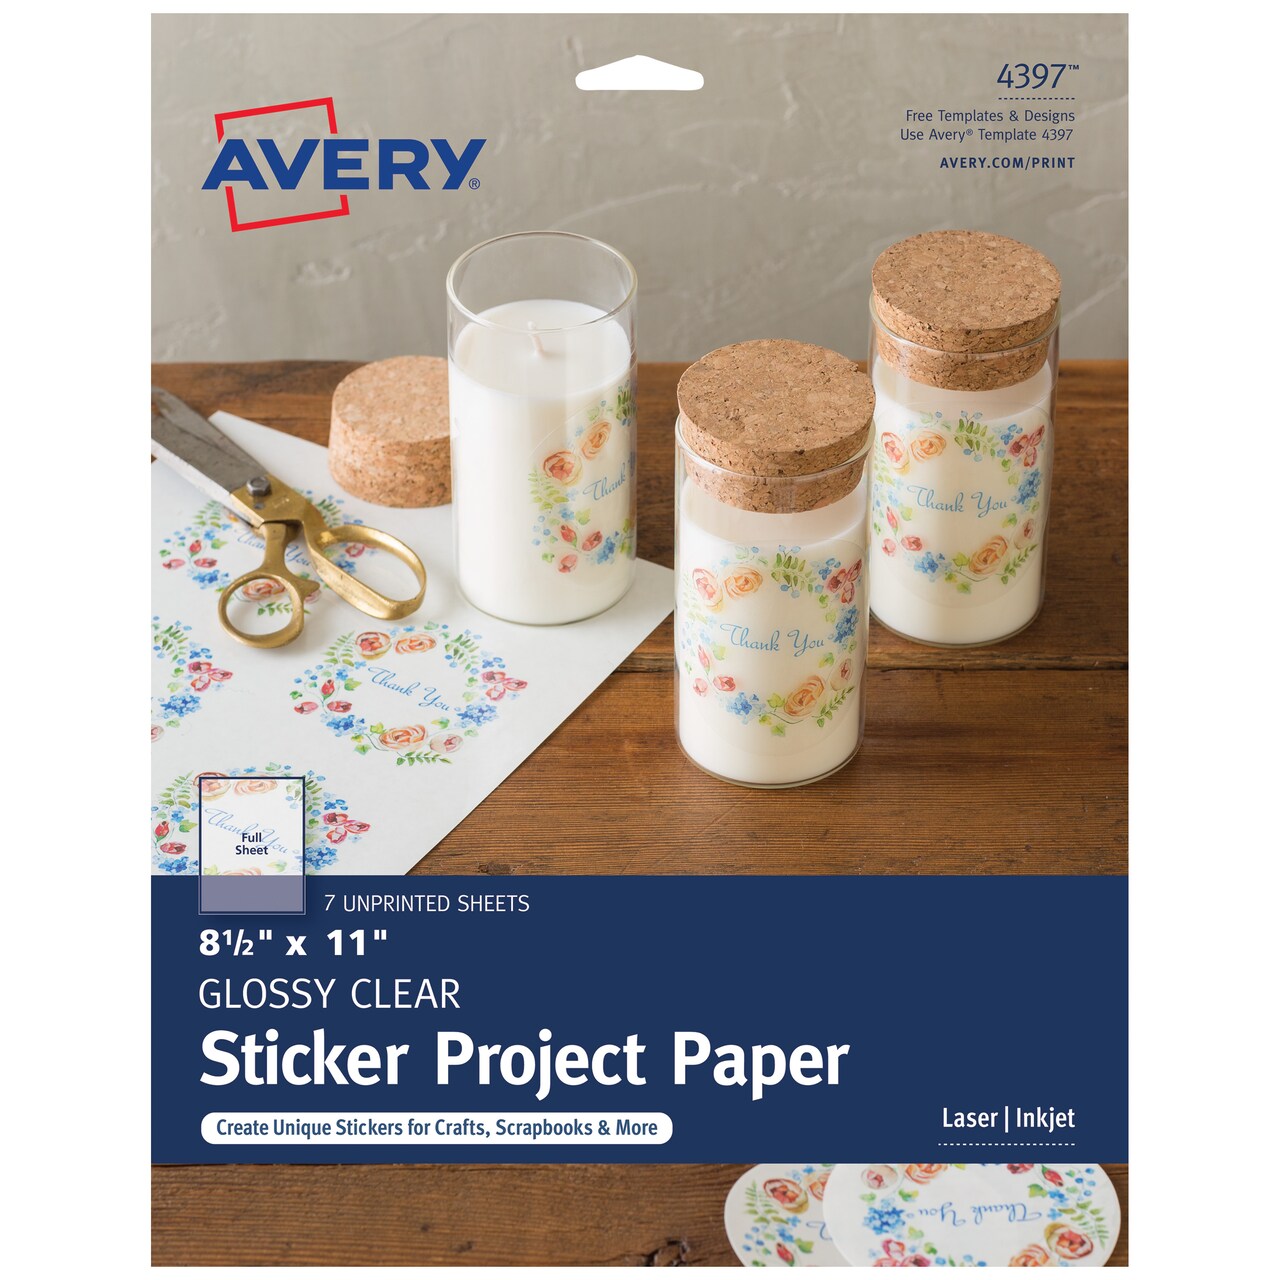 Avery Printable Sticker Paper, Glossy Clear, 8.5 x 11, Laser & Inkjet  Printers, 7 Craft Paper Sheets (4397)